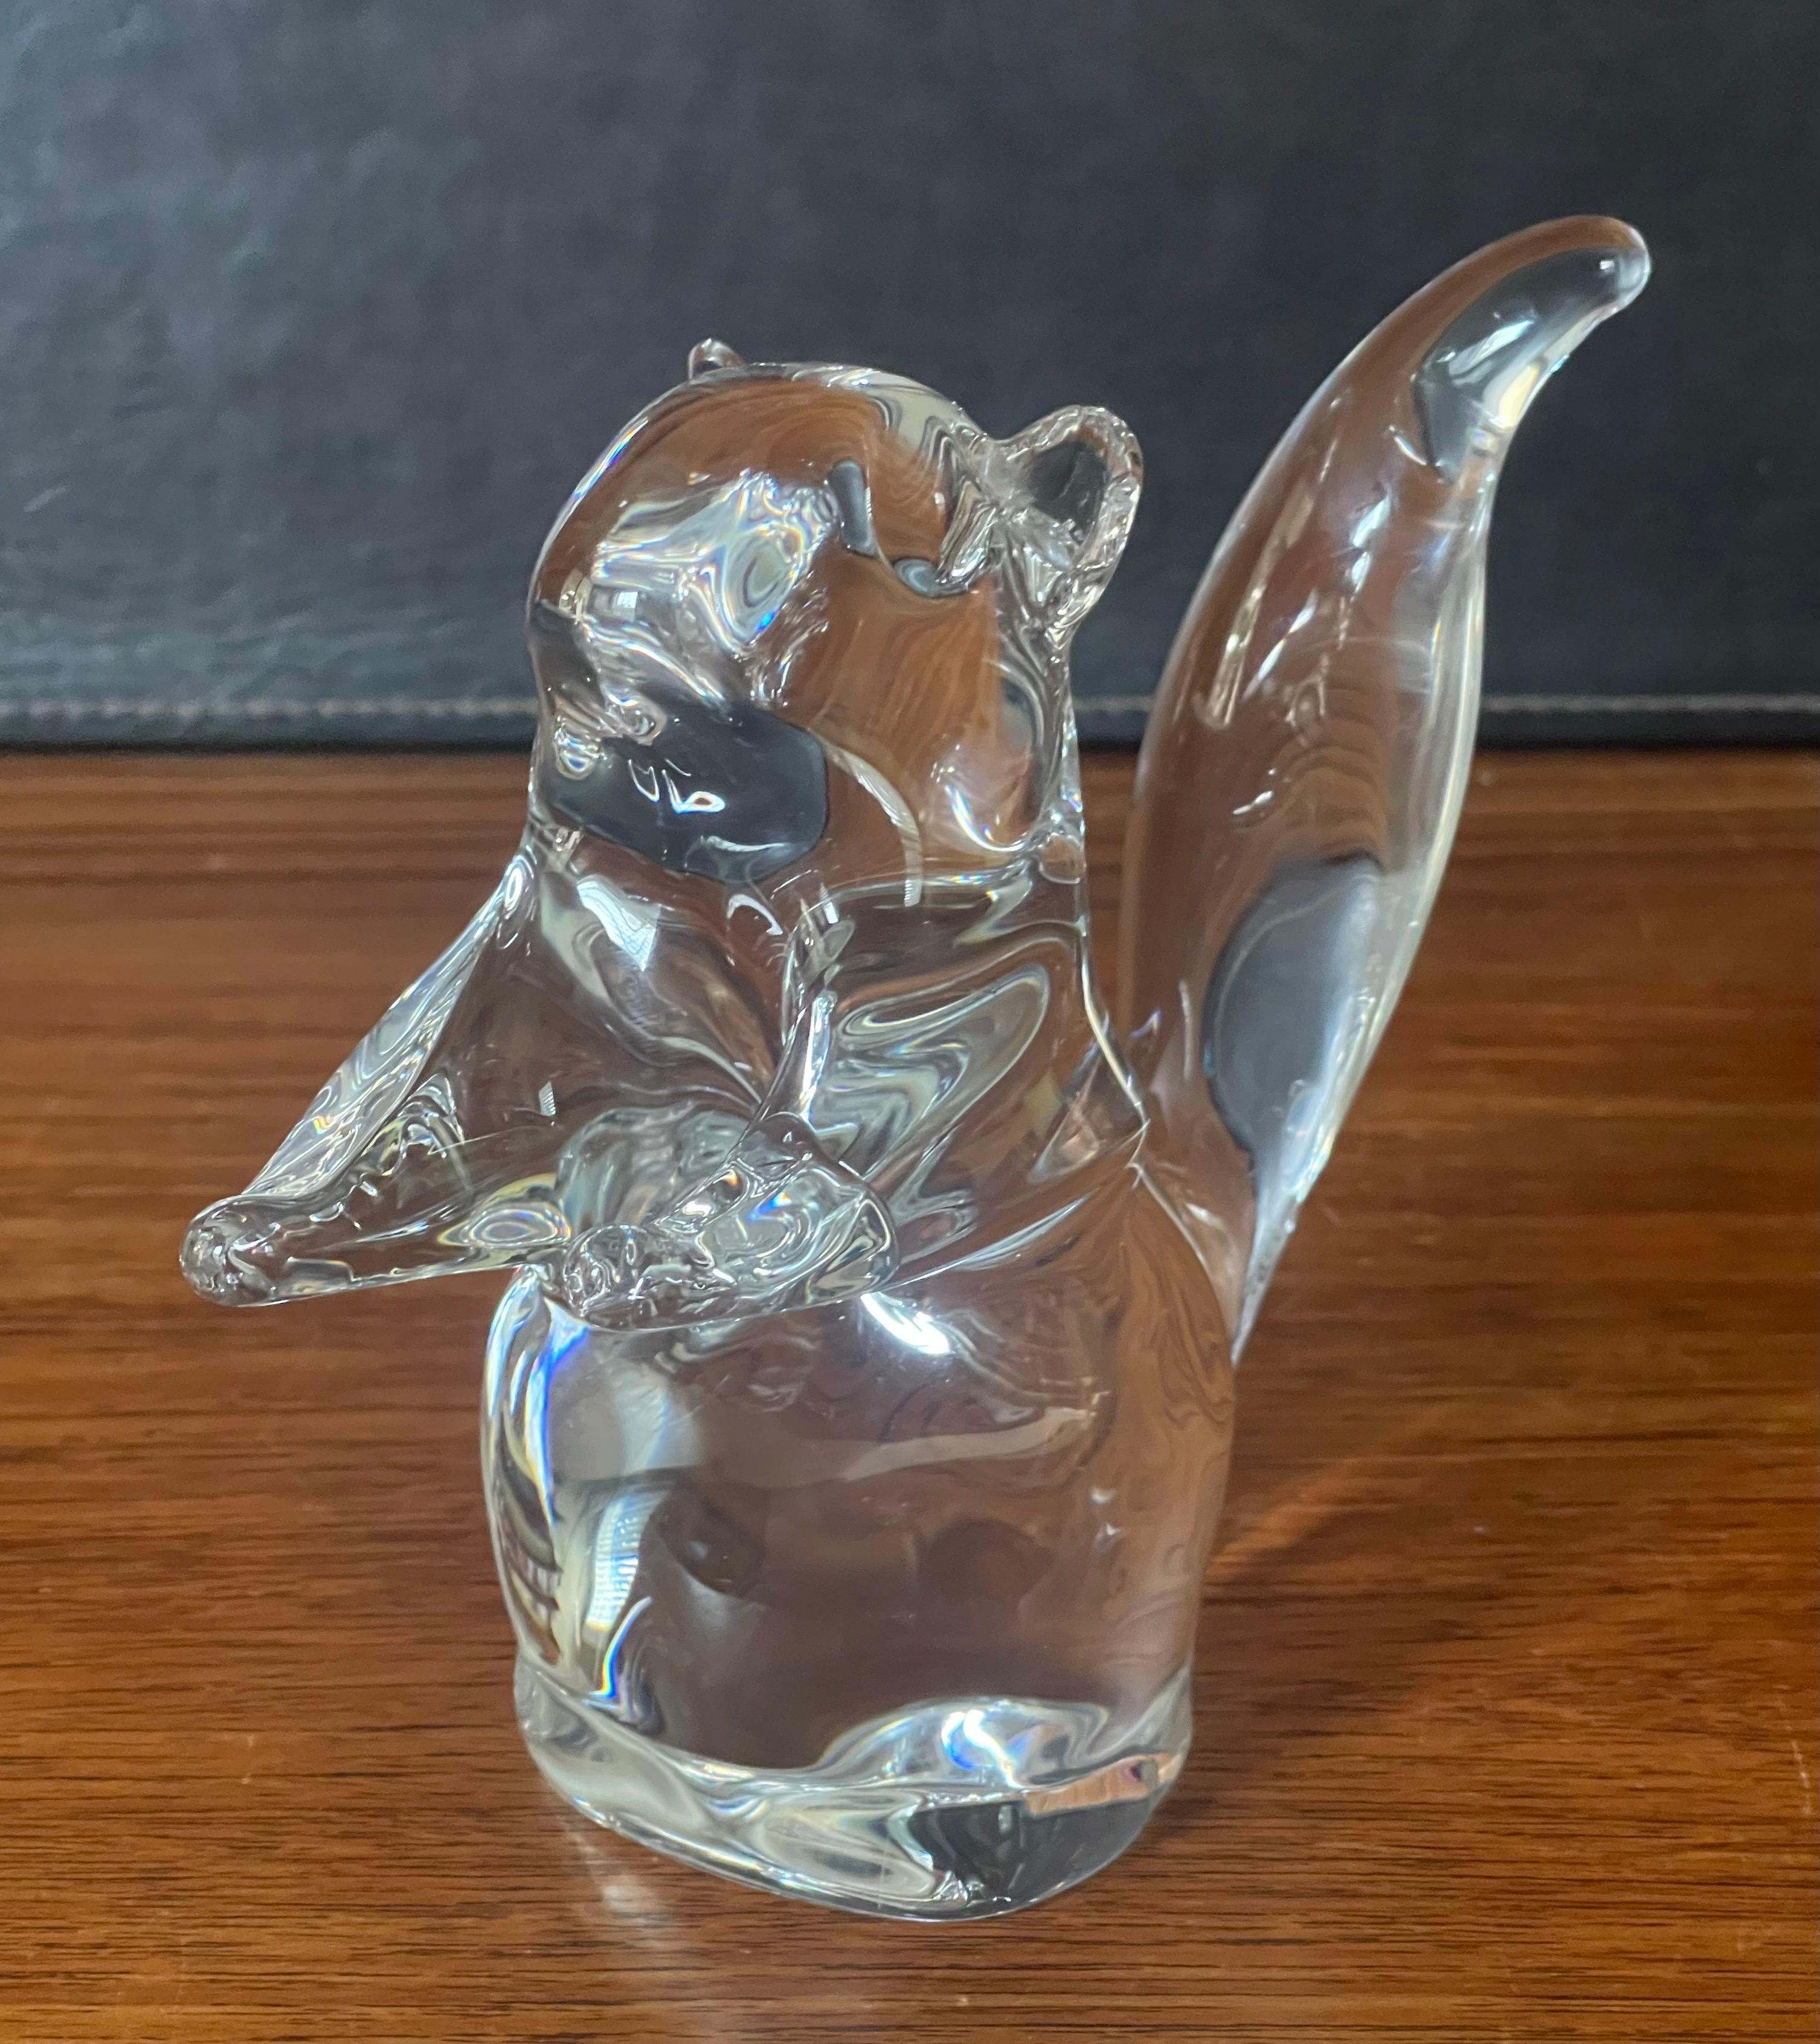 Stylized crystal squirrel sculpture by Daum France, circa 1990s. The etched signature on the base reads 